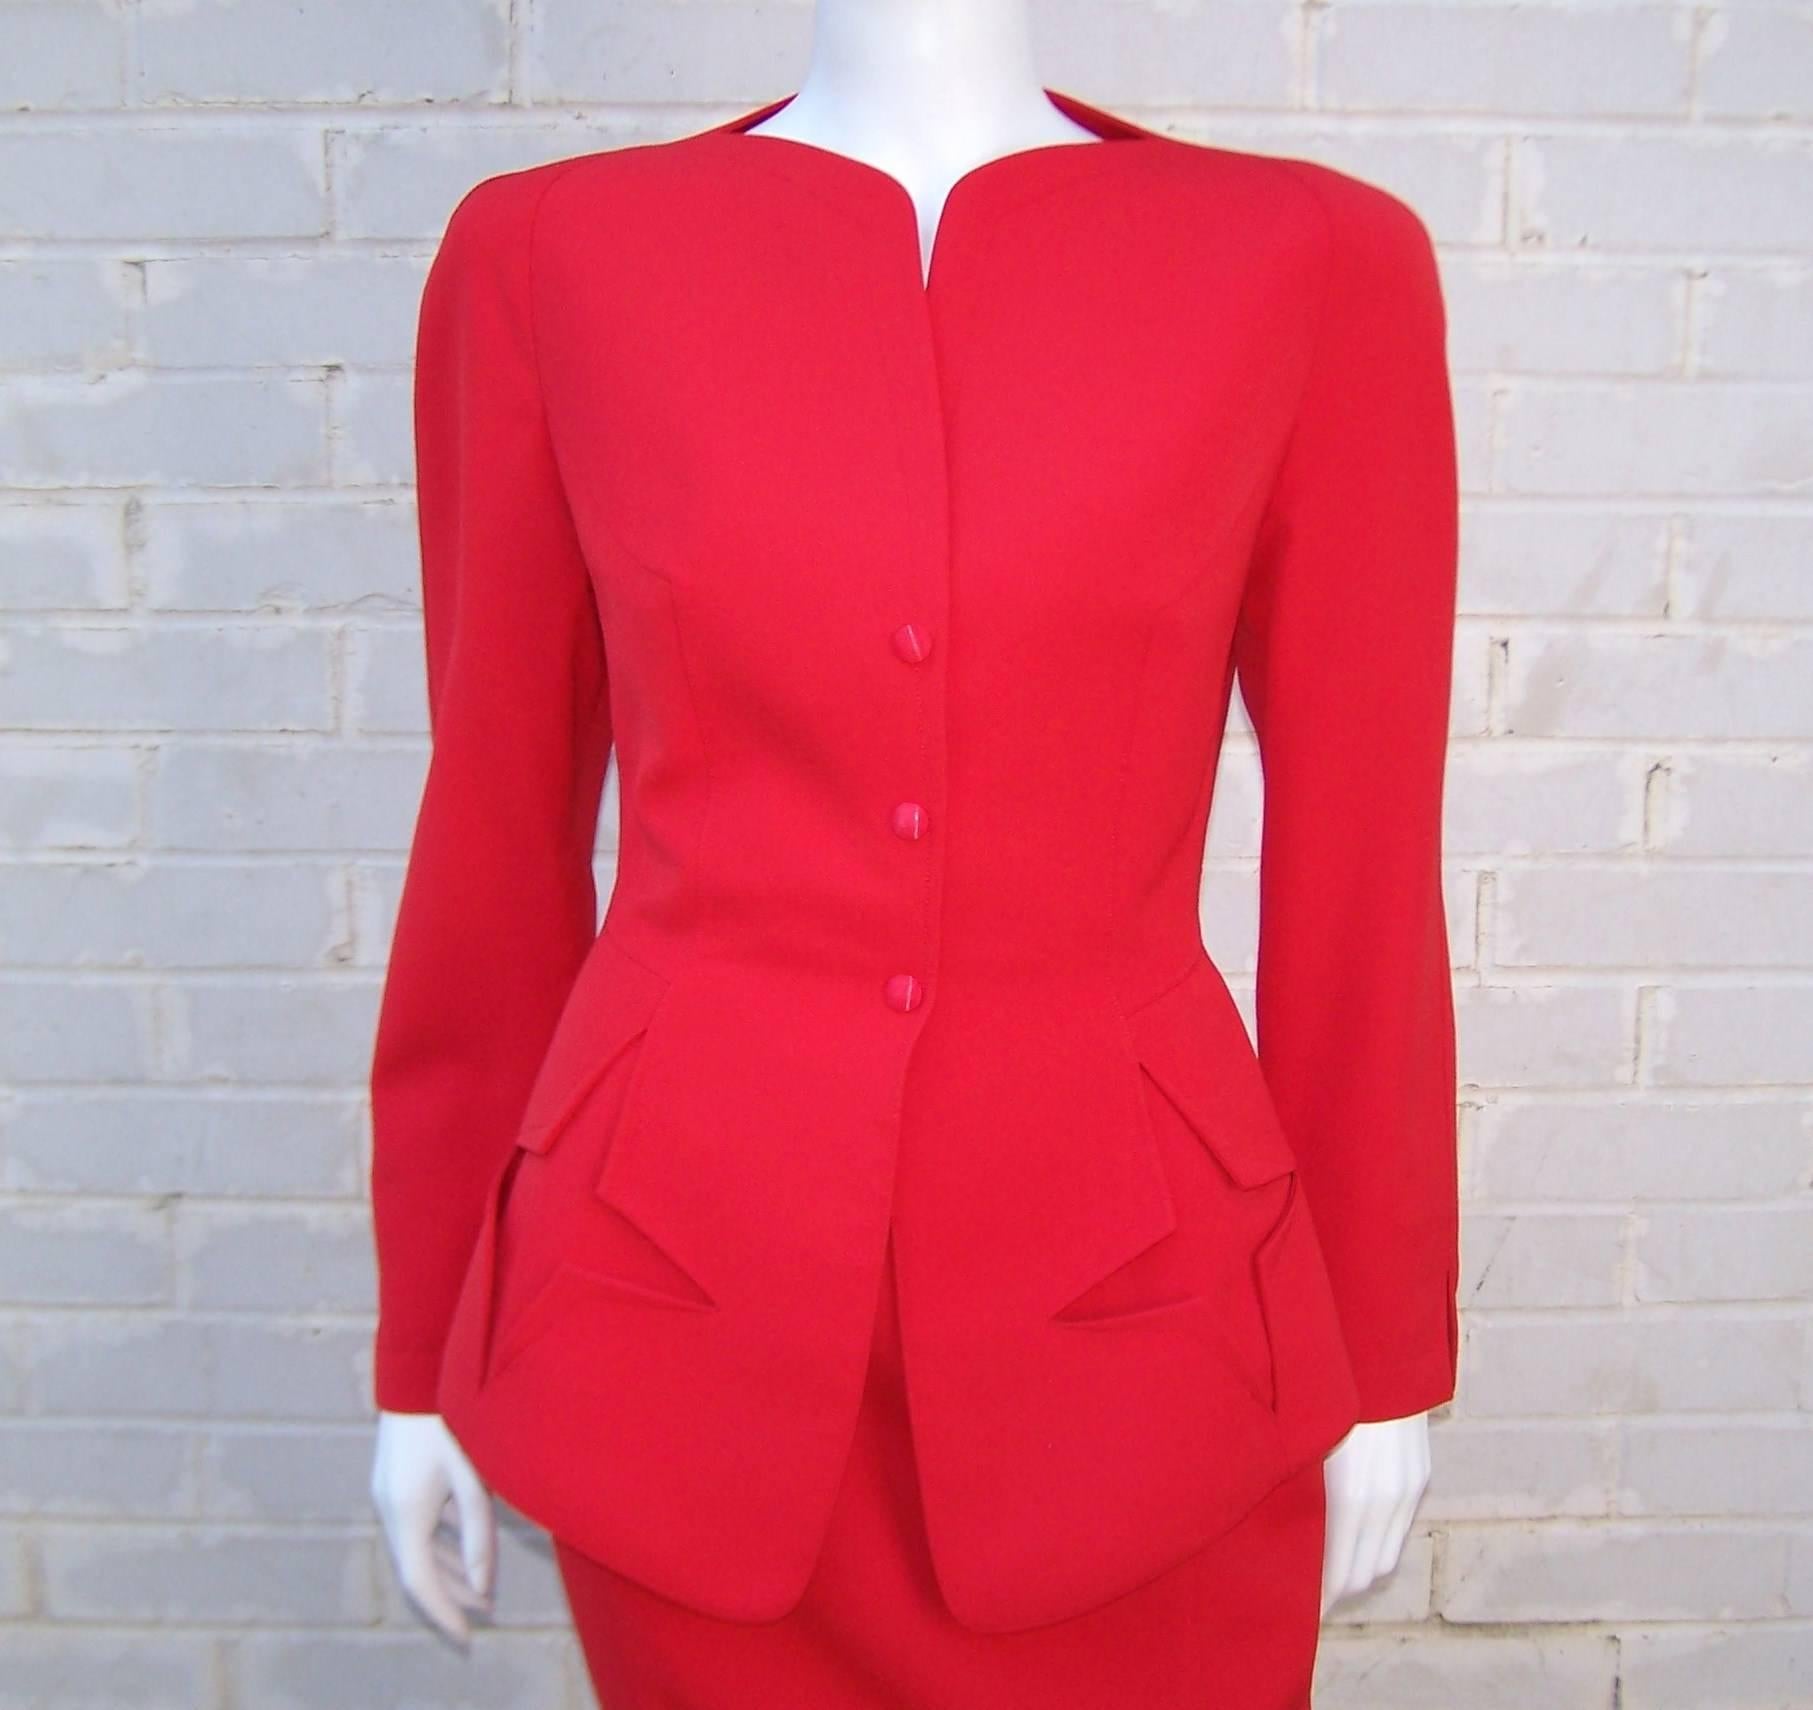 c.1990 Thierry Mugler Fiery Red Suit With Star Pockets & Stylized Skirt 1